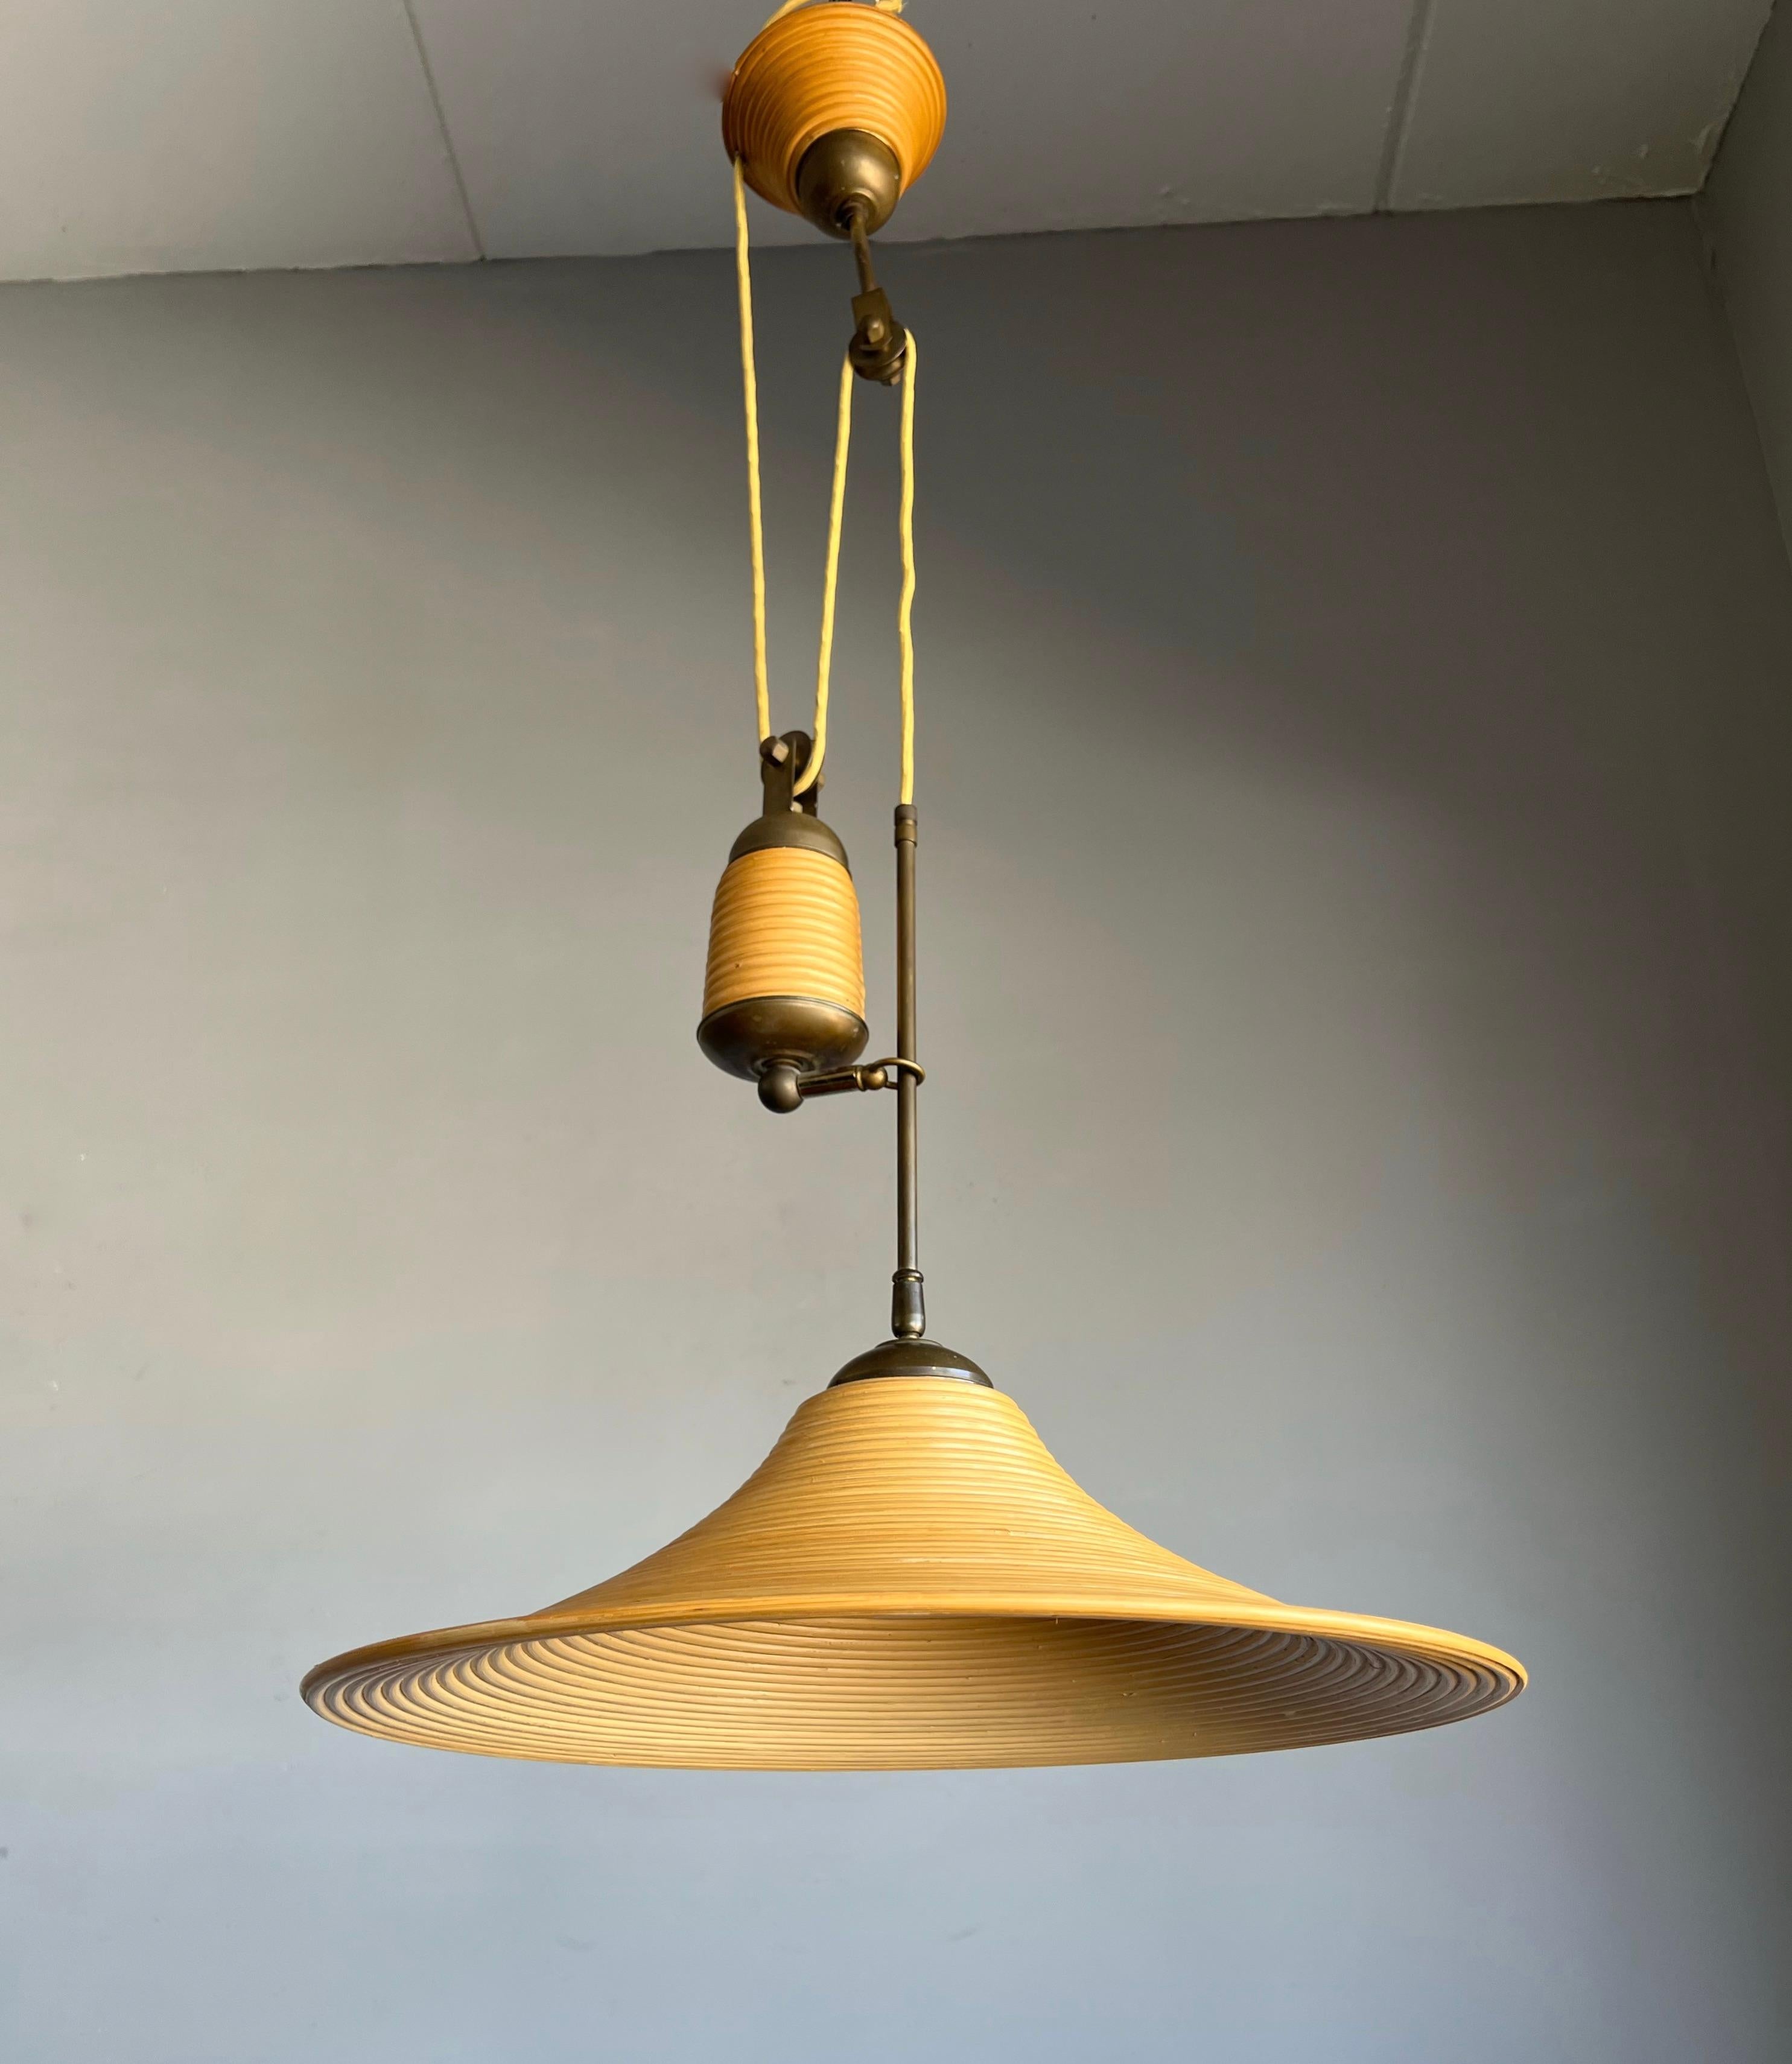 Rare Handcrafted Mid-Century Modern Rattan & Brass Pendant Light / Ceiling Lamp For Sale 4